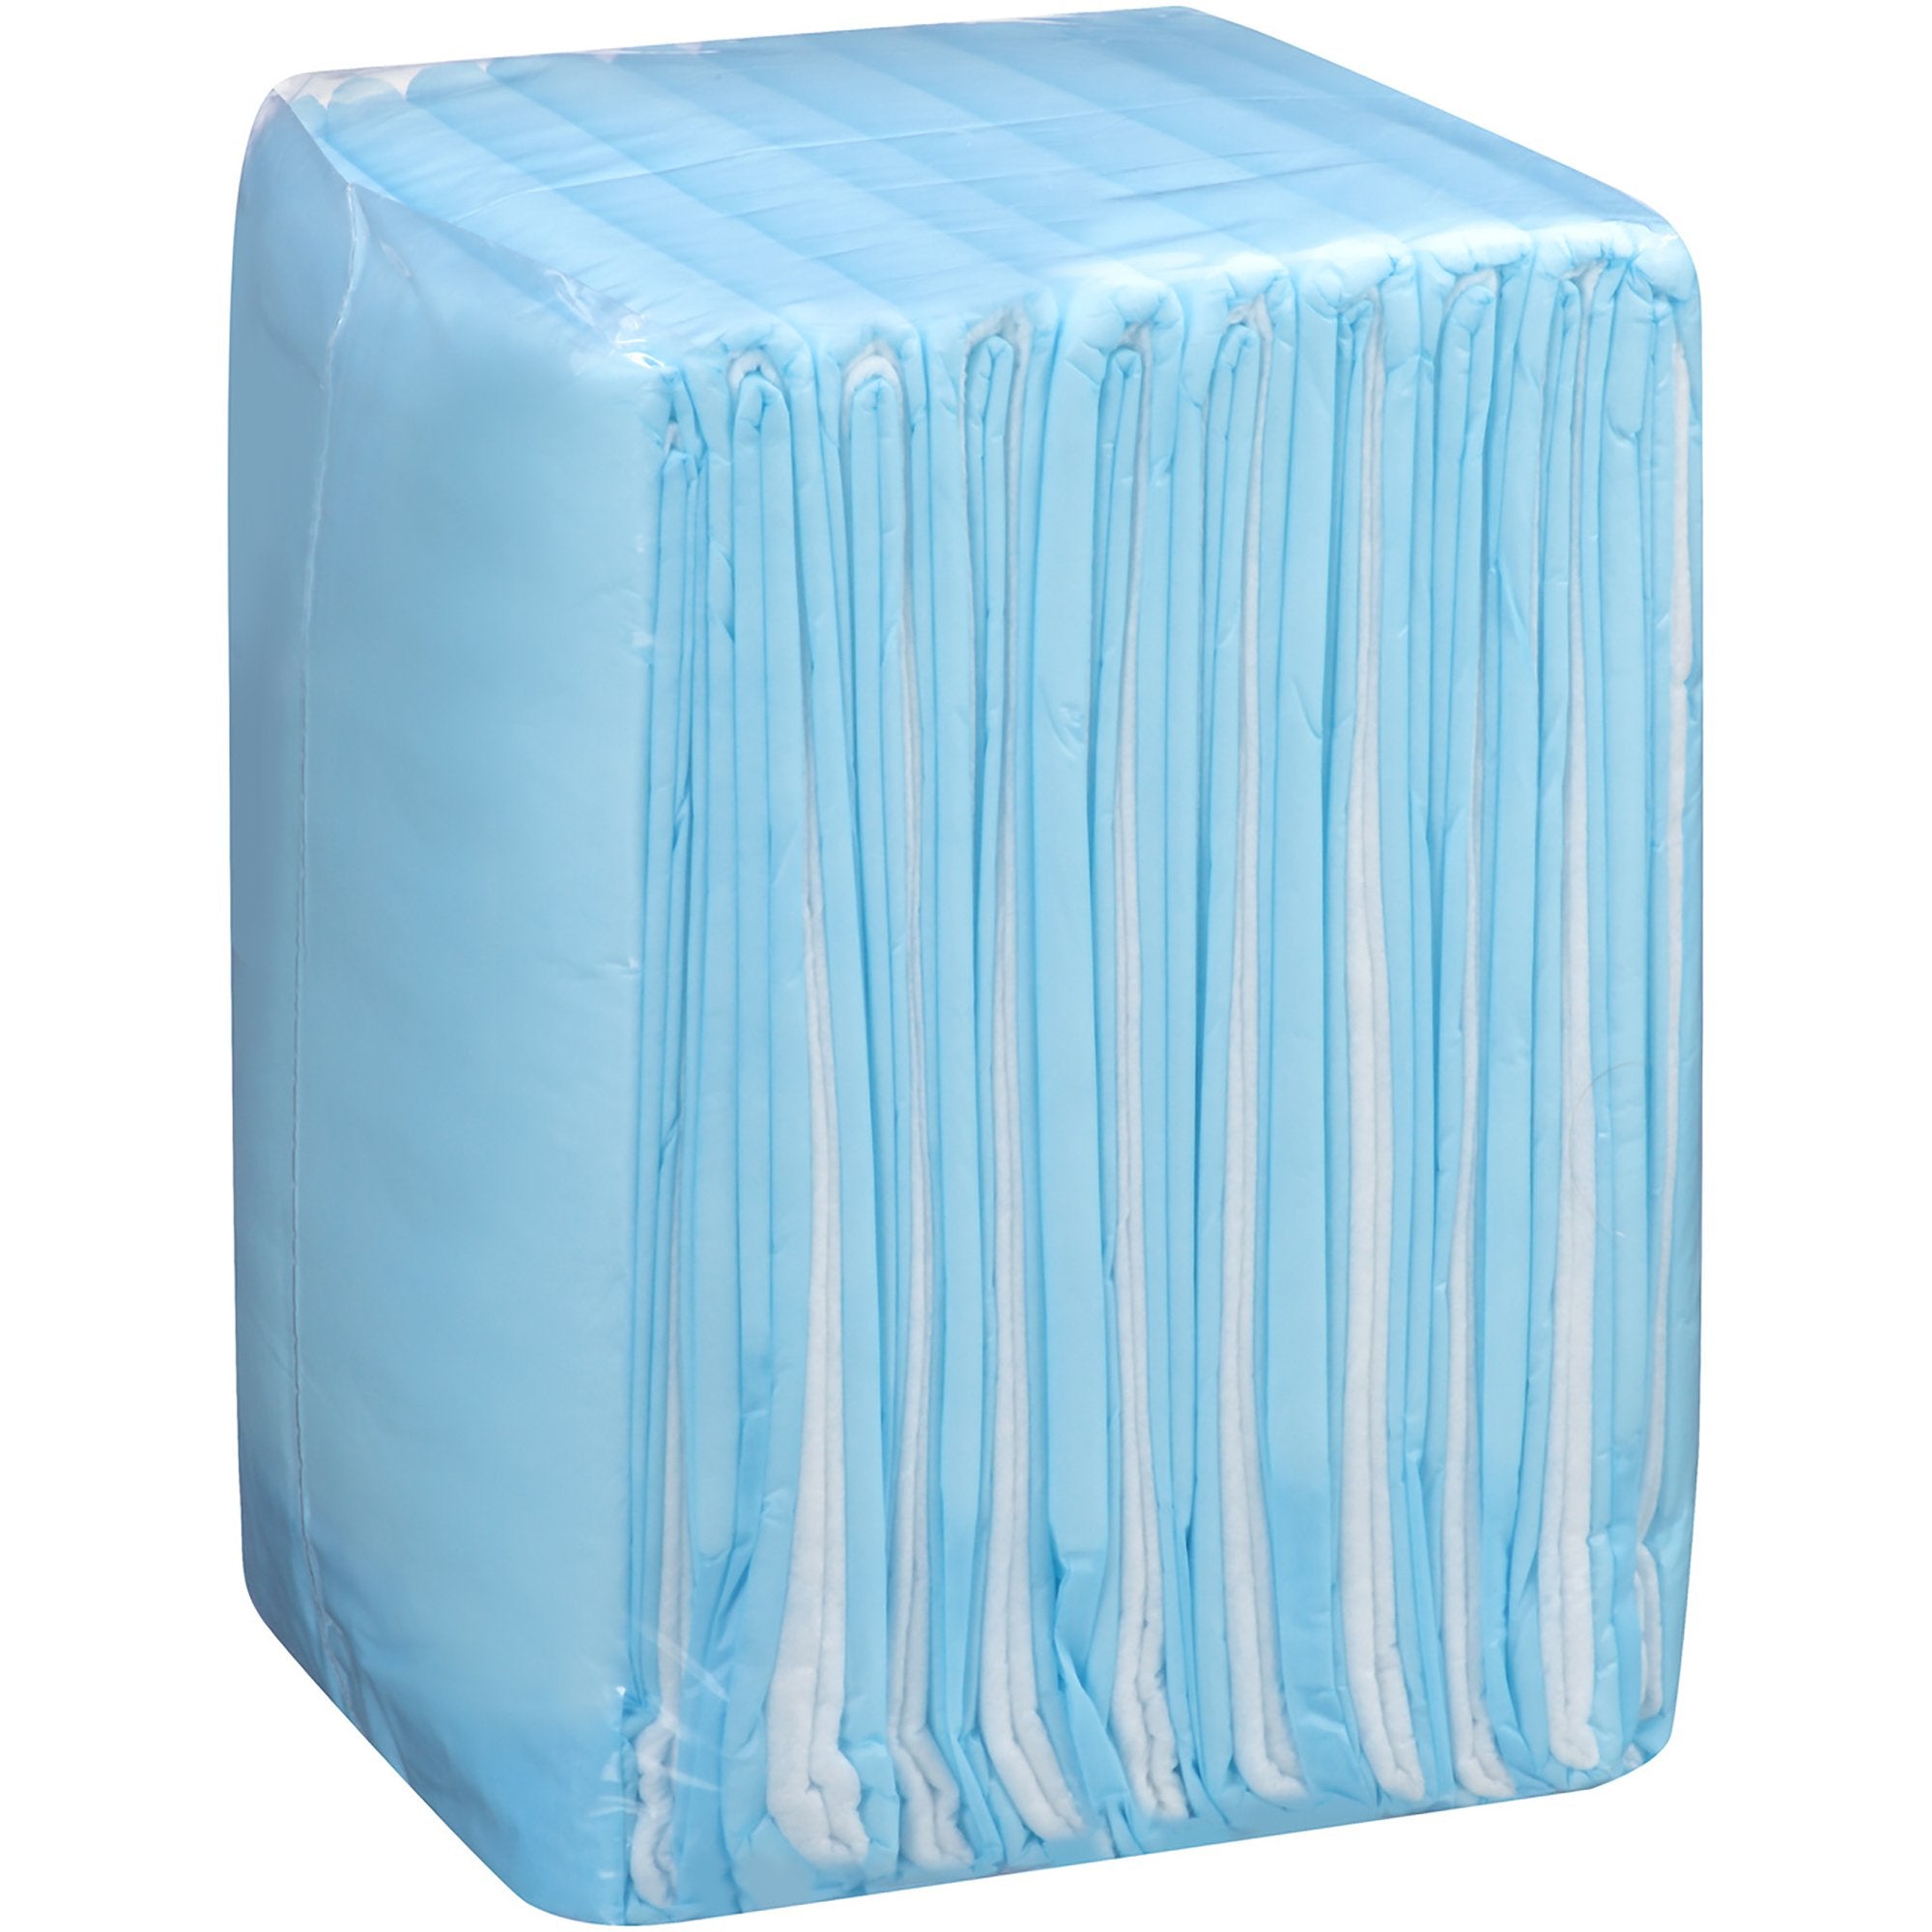 Disposable Underpad Attends Care Dri-Sorb 30 X 30 Inch Cellulose / Polymer Heavy Absorbency